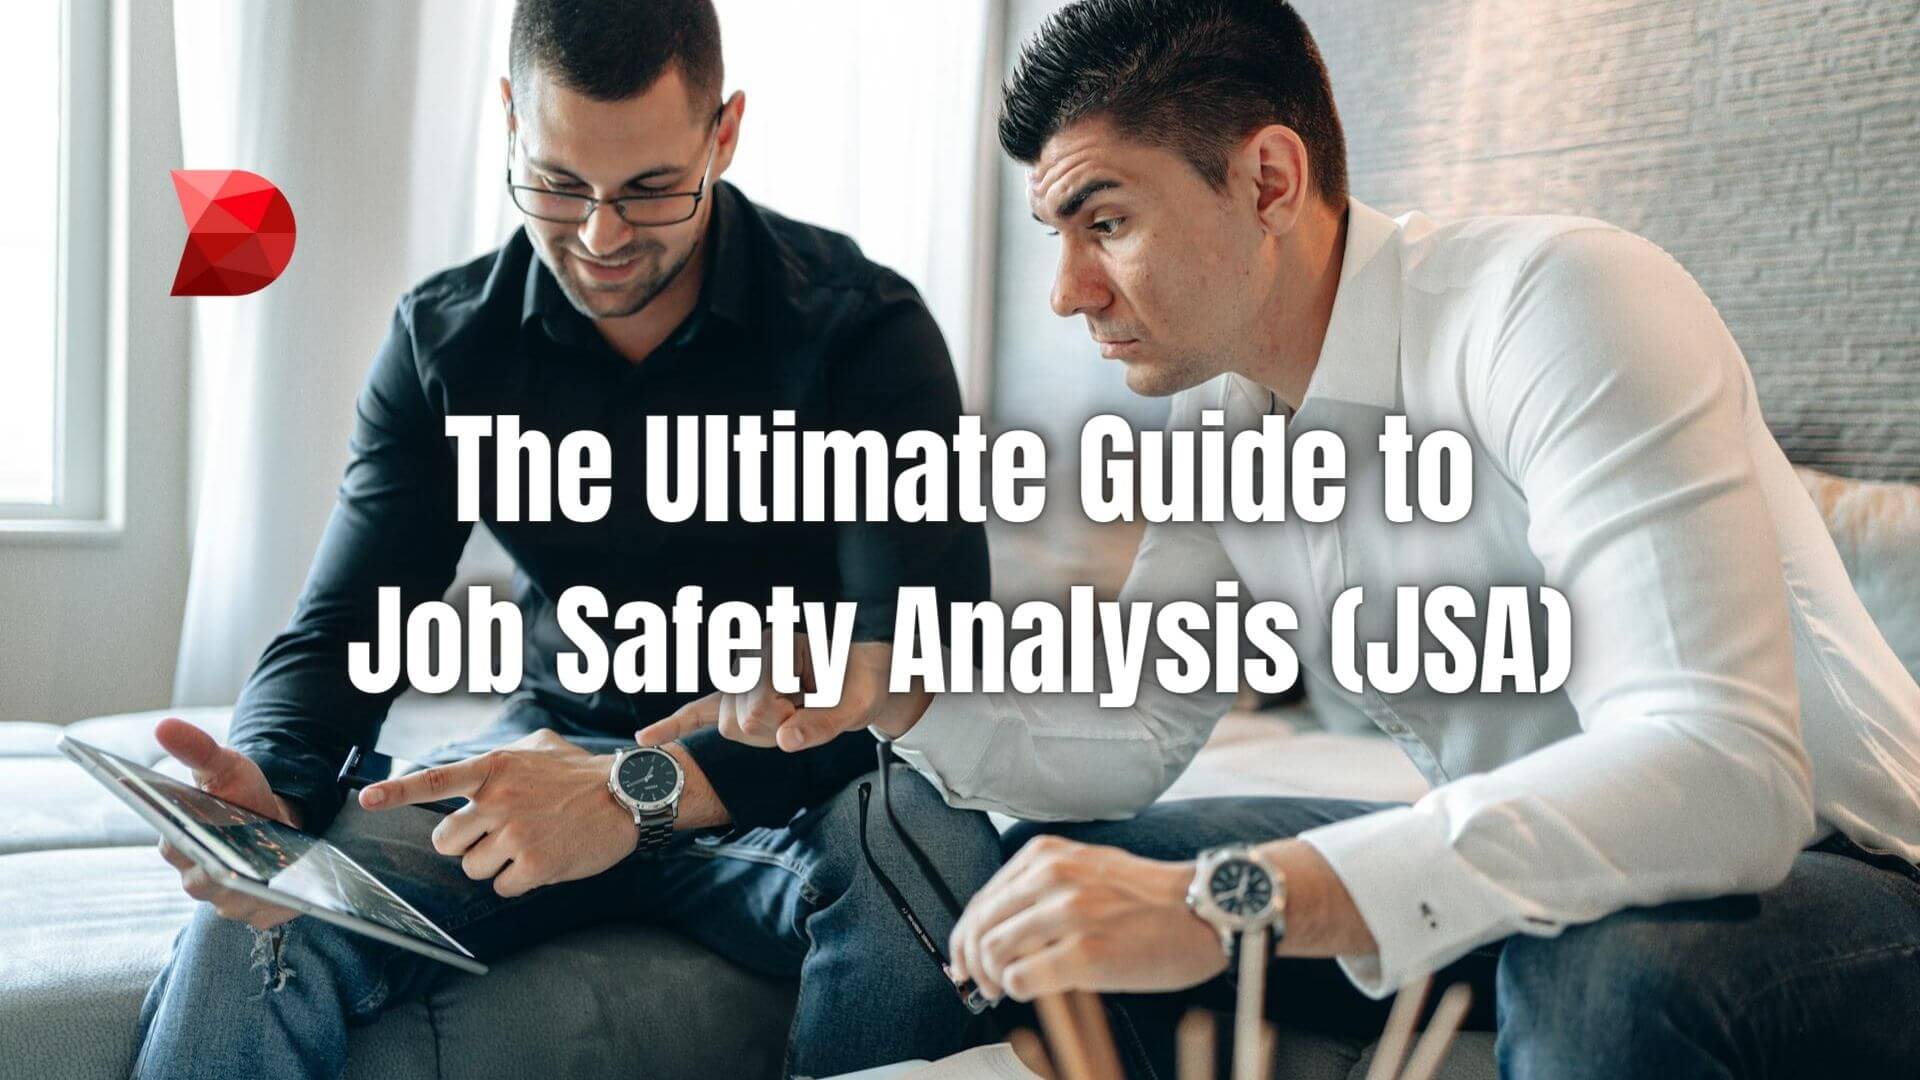 Master the art of Job Safety Analysis (JSA) with our guide. Learn effective techniques to ensure workplace safety and compliance.